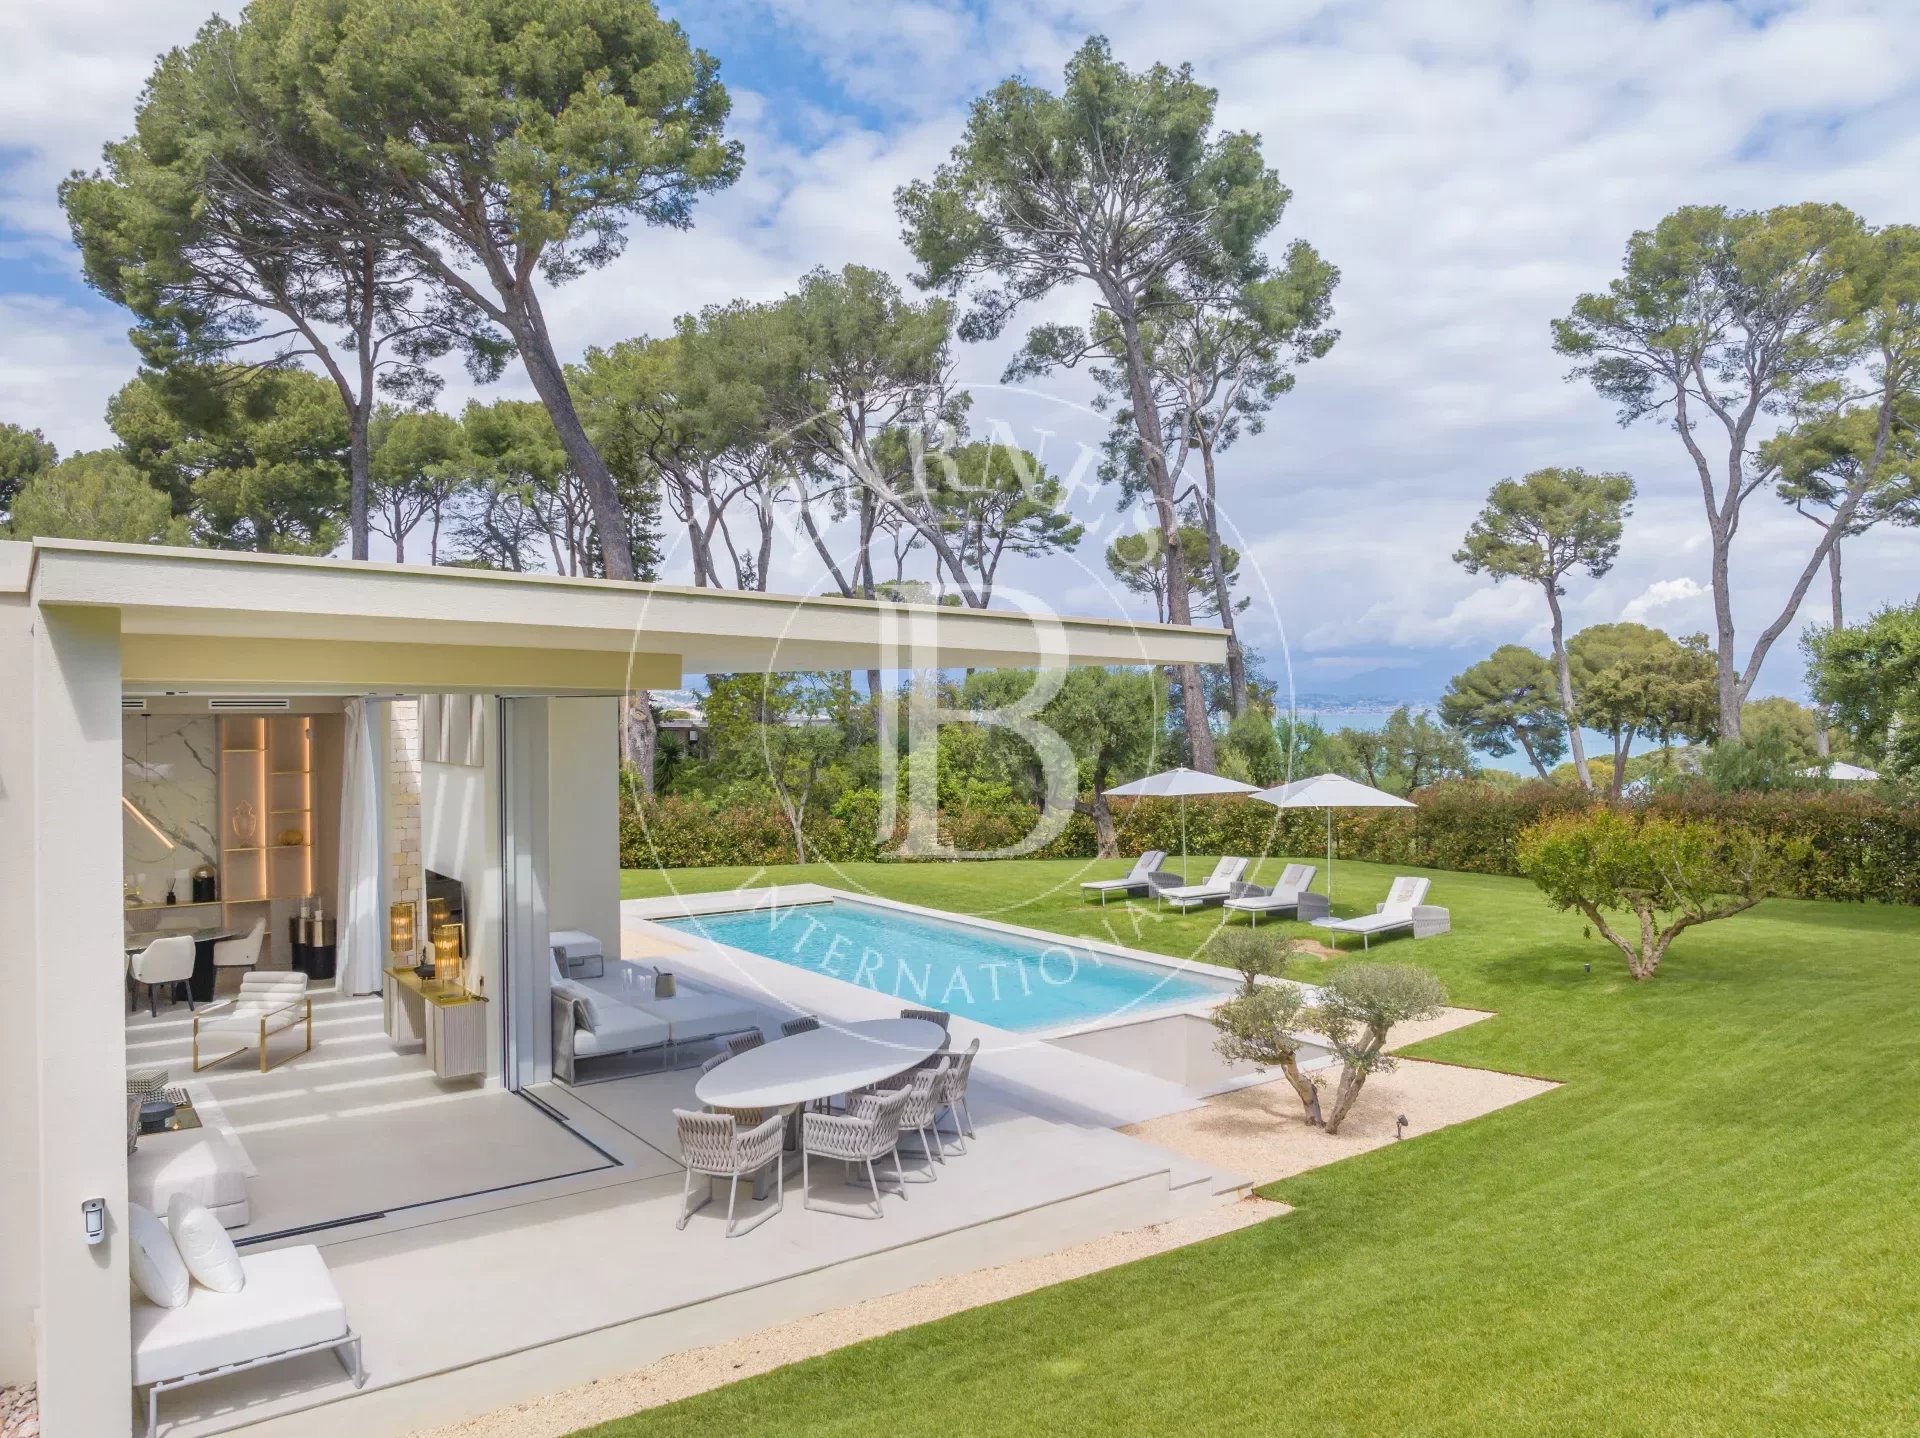 Villa Antibes - picture 1 title=